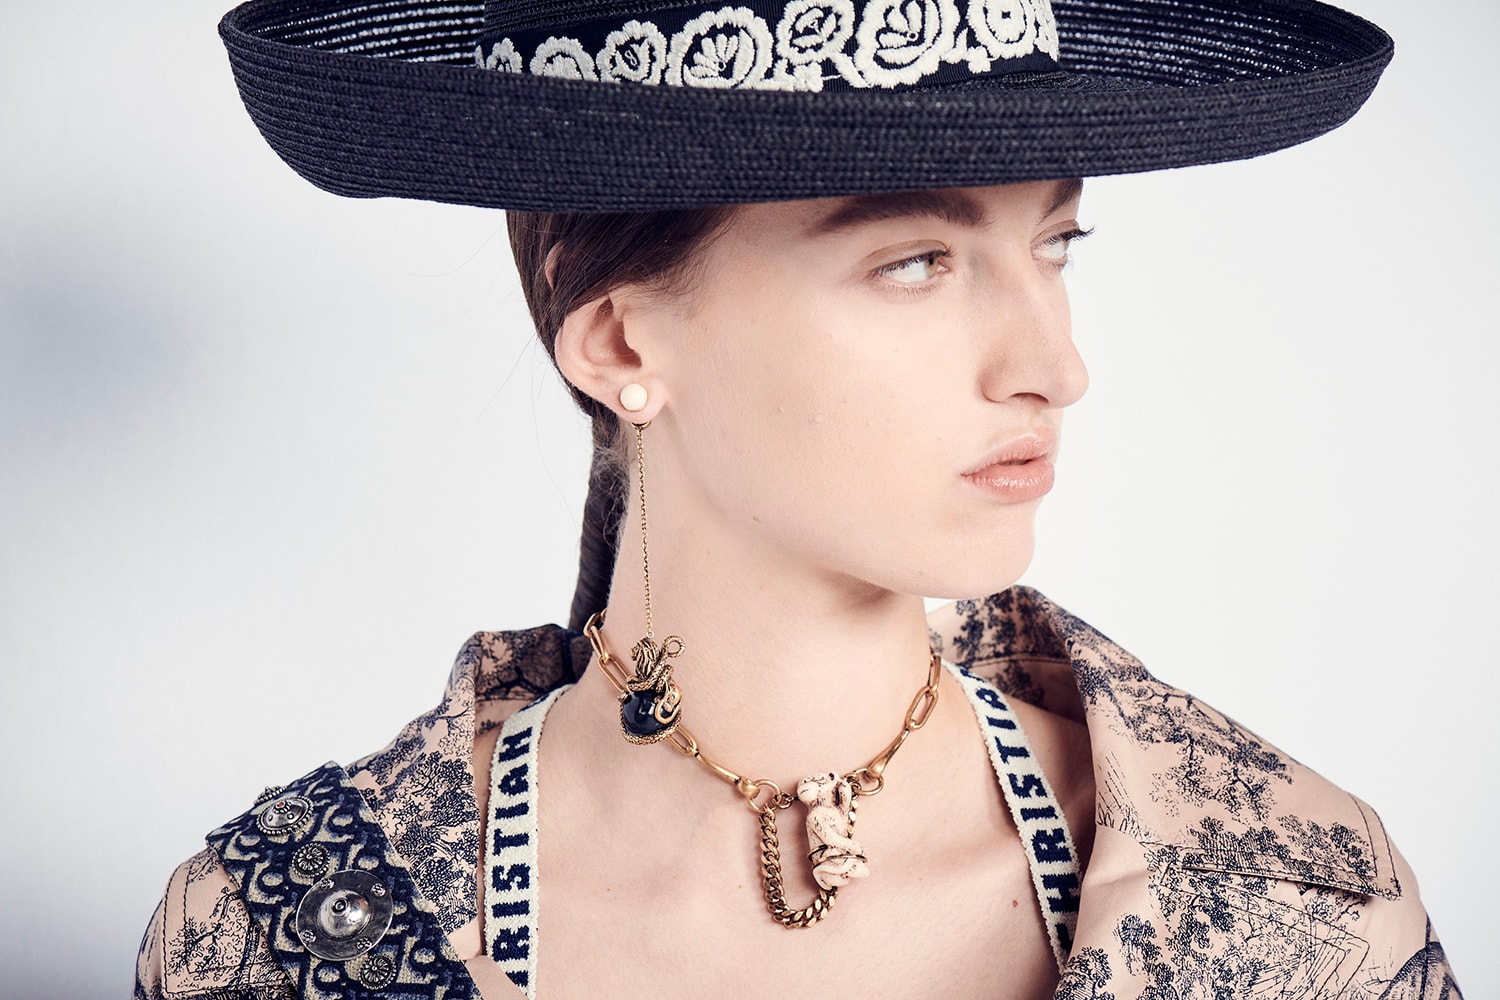 Dior Cruise 2019 Resort Runway Backstage Earring Hat Necklace